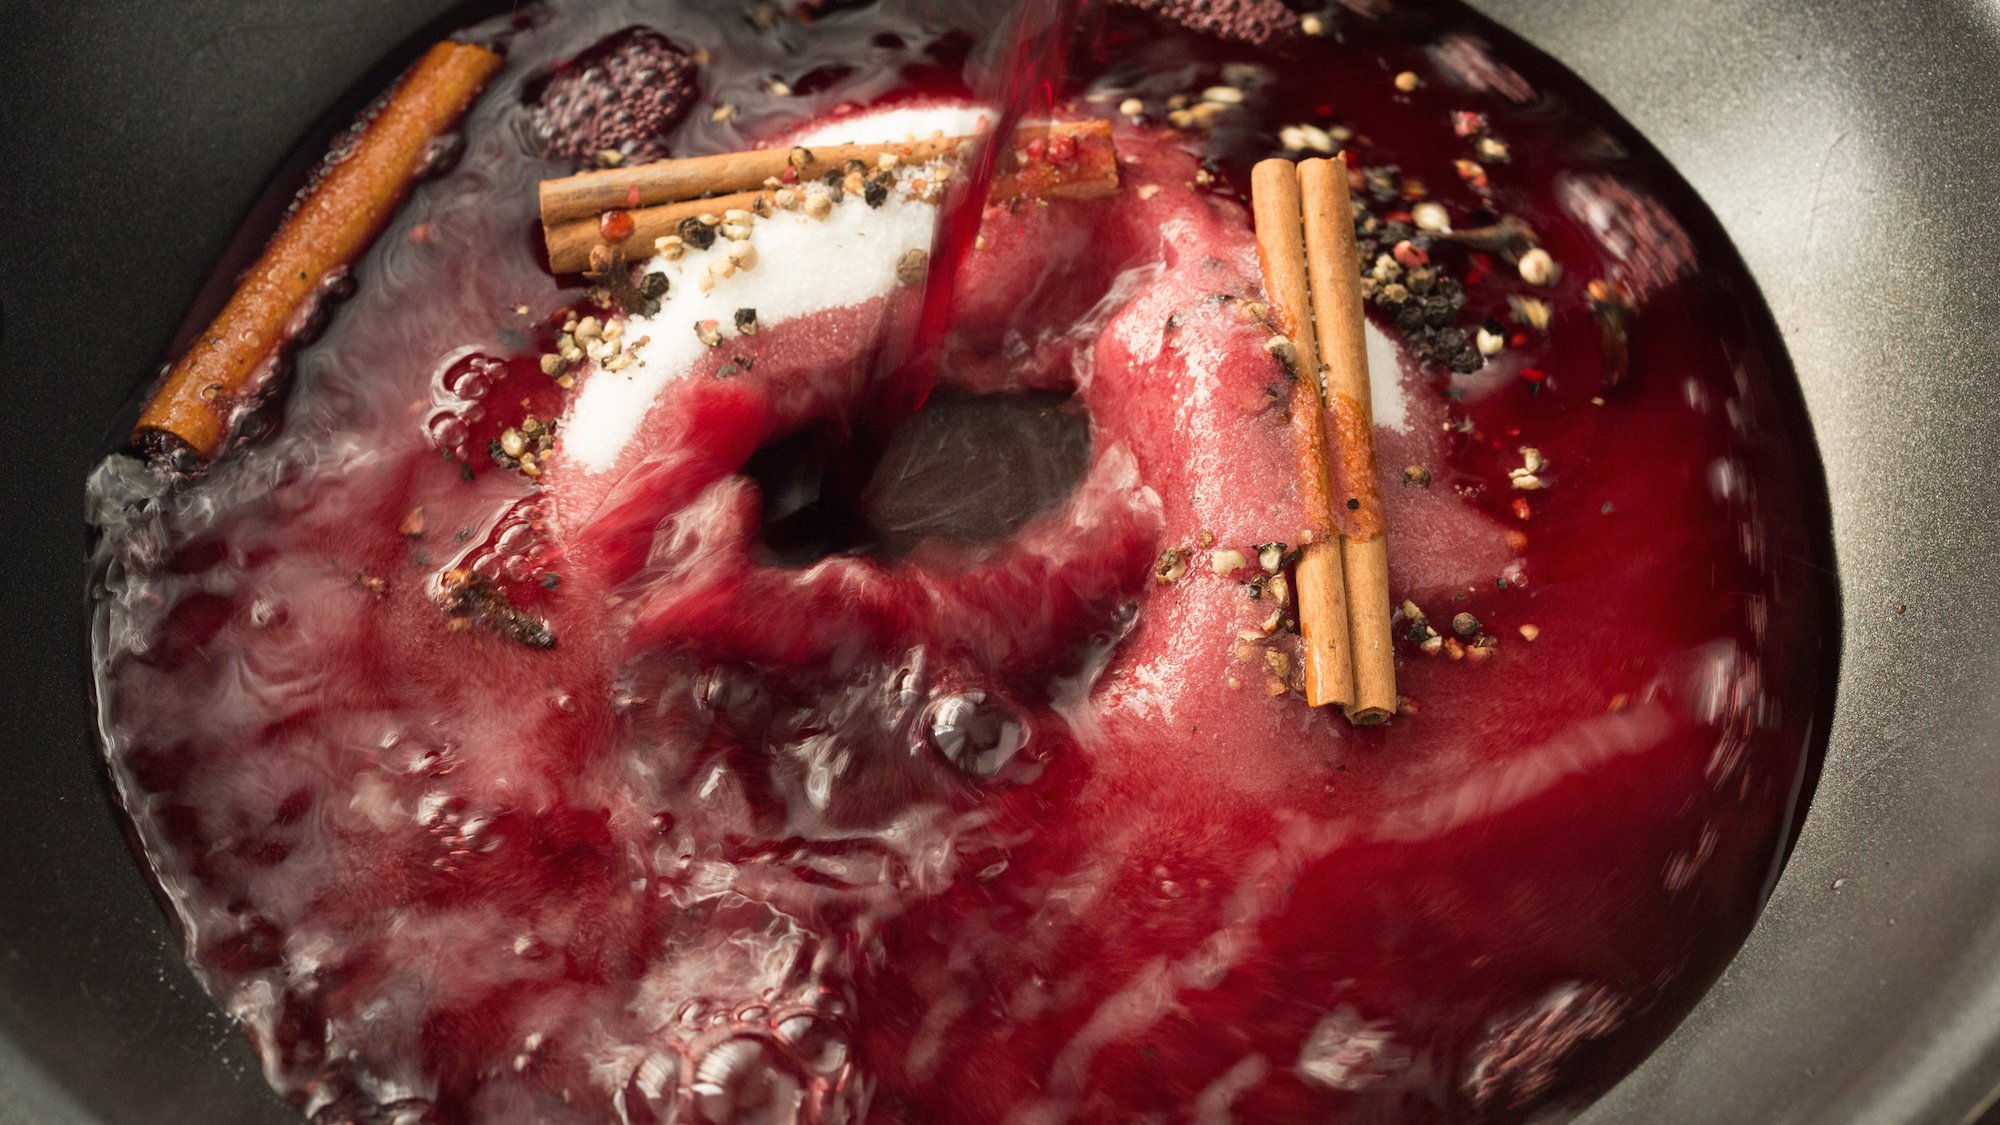 Sugar, cinnamon sticks, and spices in a skillet with red wine being poured over to make Spiced Red Wine Syrup